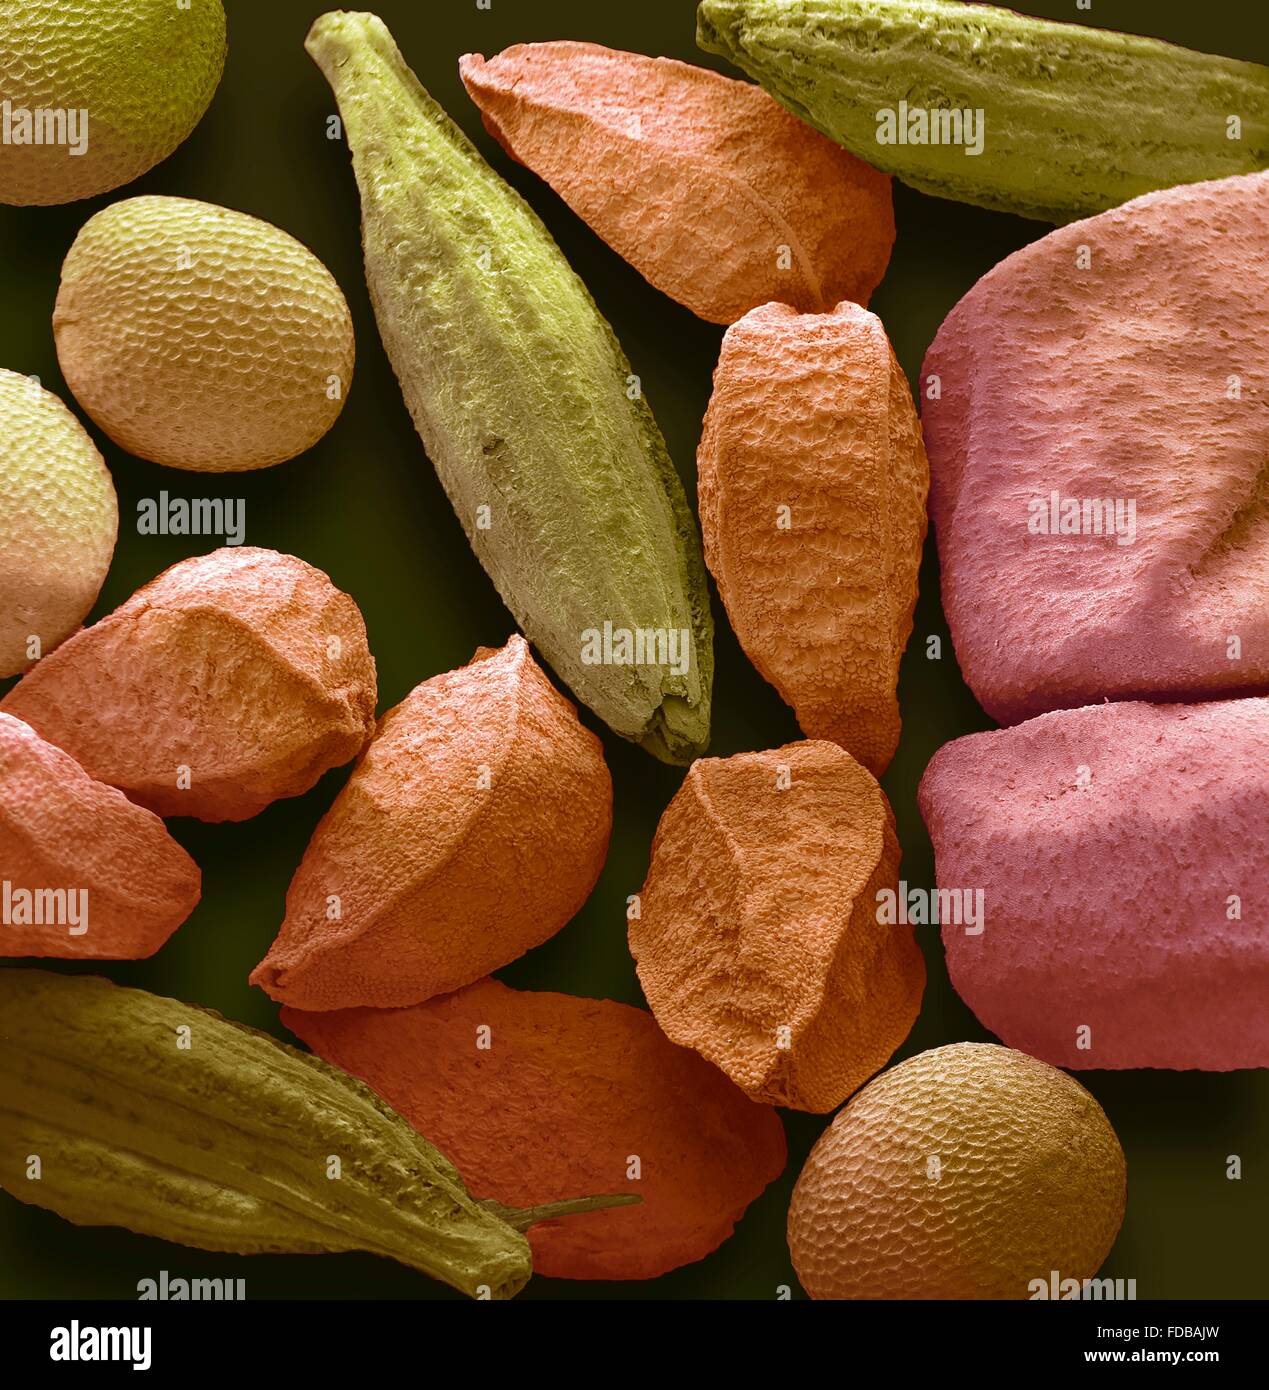 Panch phoran. Coloured scanning electron micrograph (SEM) of panch phoran  or indian five spice. It is a spice blend commonly used in Eastern India  and Bangladesh and consists of the following seeds: